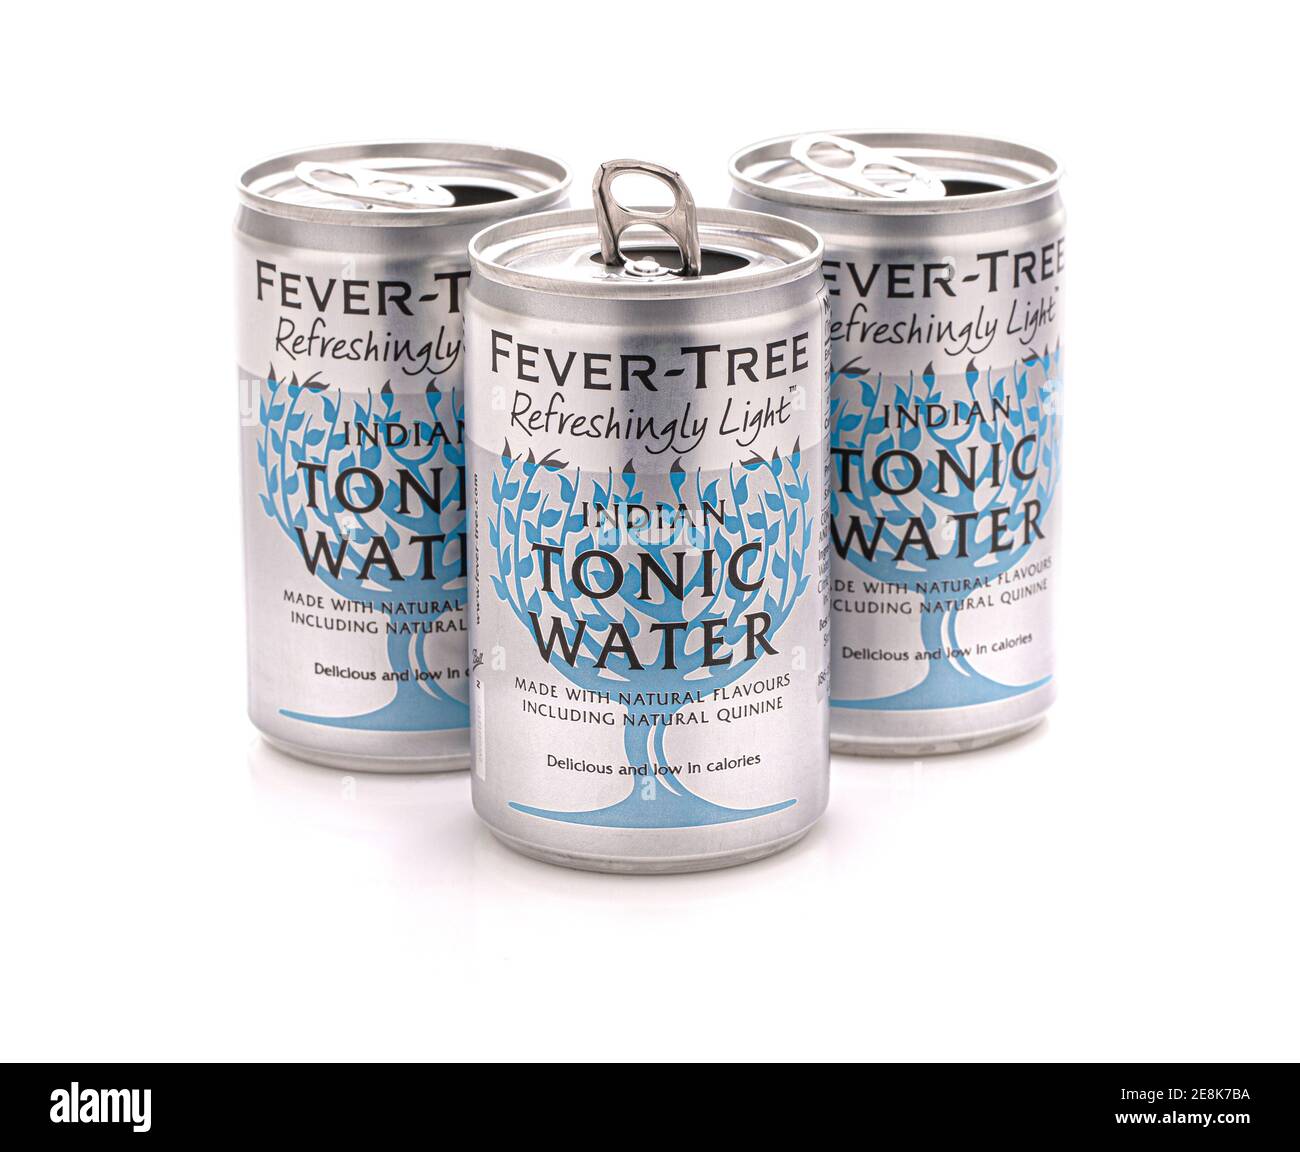 SWINDON, UK - JANUARY 30, 2021: Fever Tree Premium Indian Tonic Water open cans on a white background Stock Photo